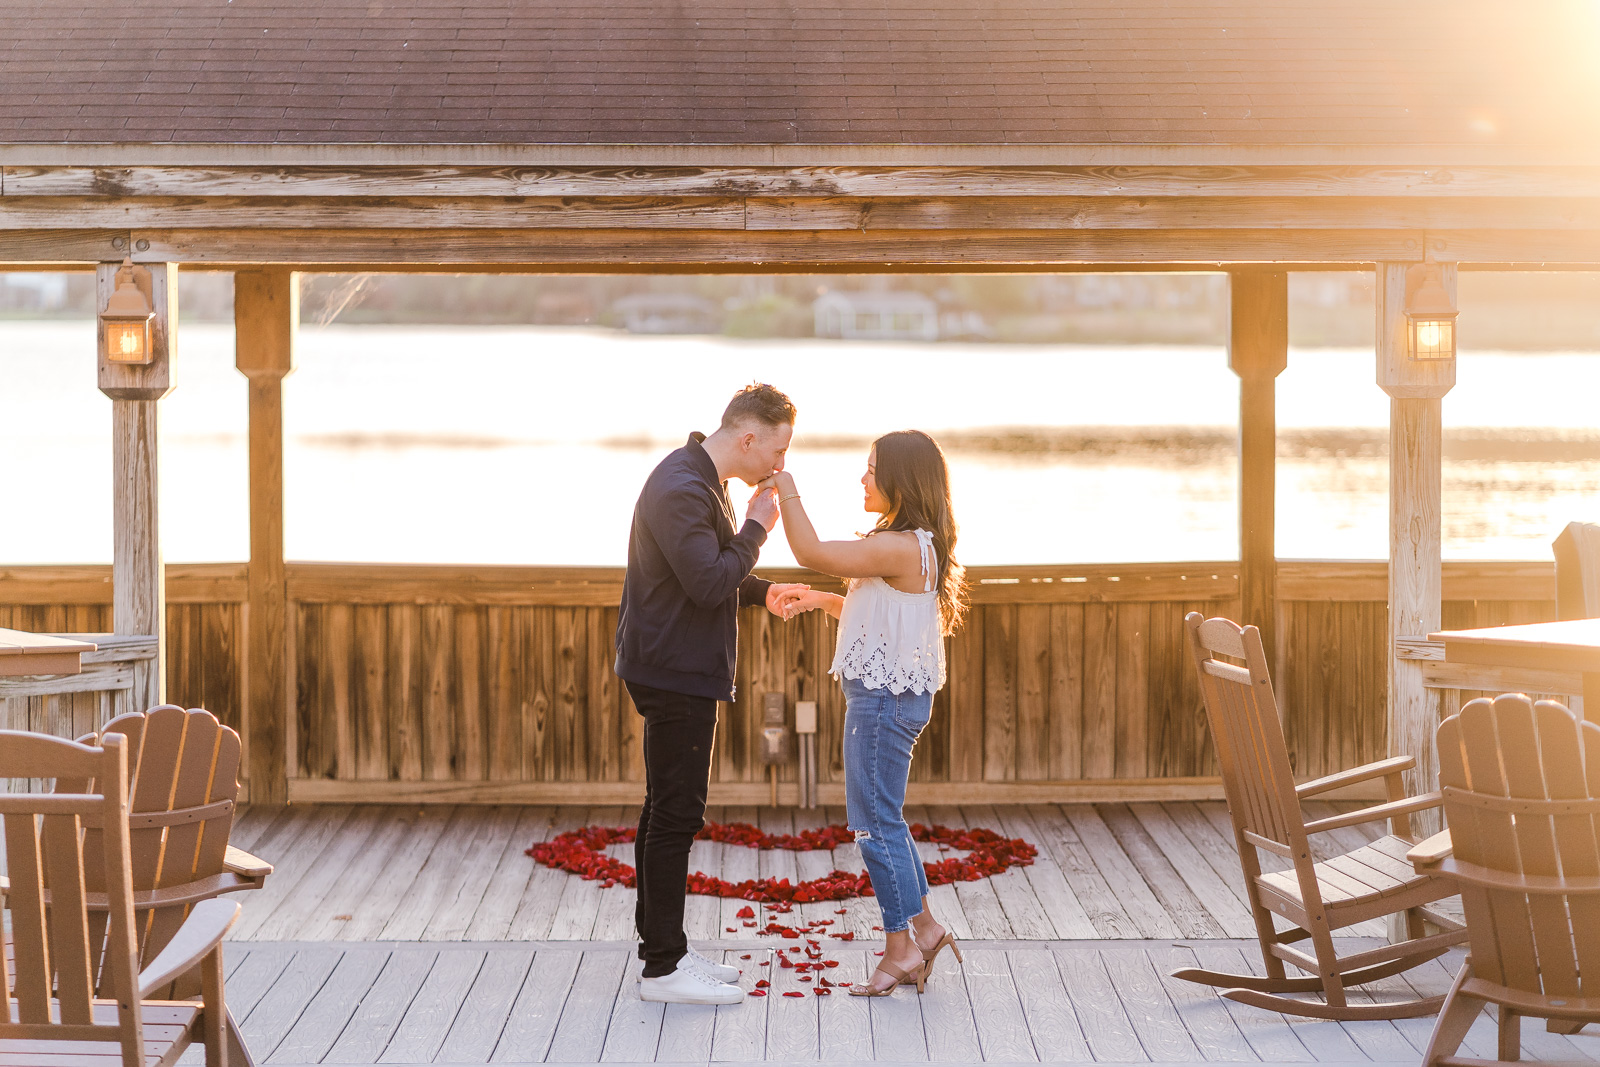 Orlando surprise proposal photographer captures sunset lakeside proposal at Enzo's on the Lake